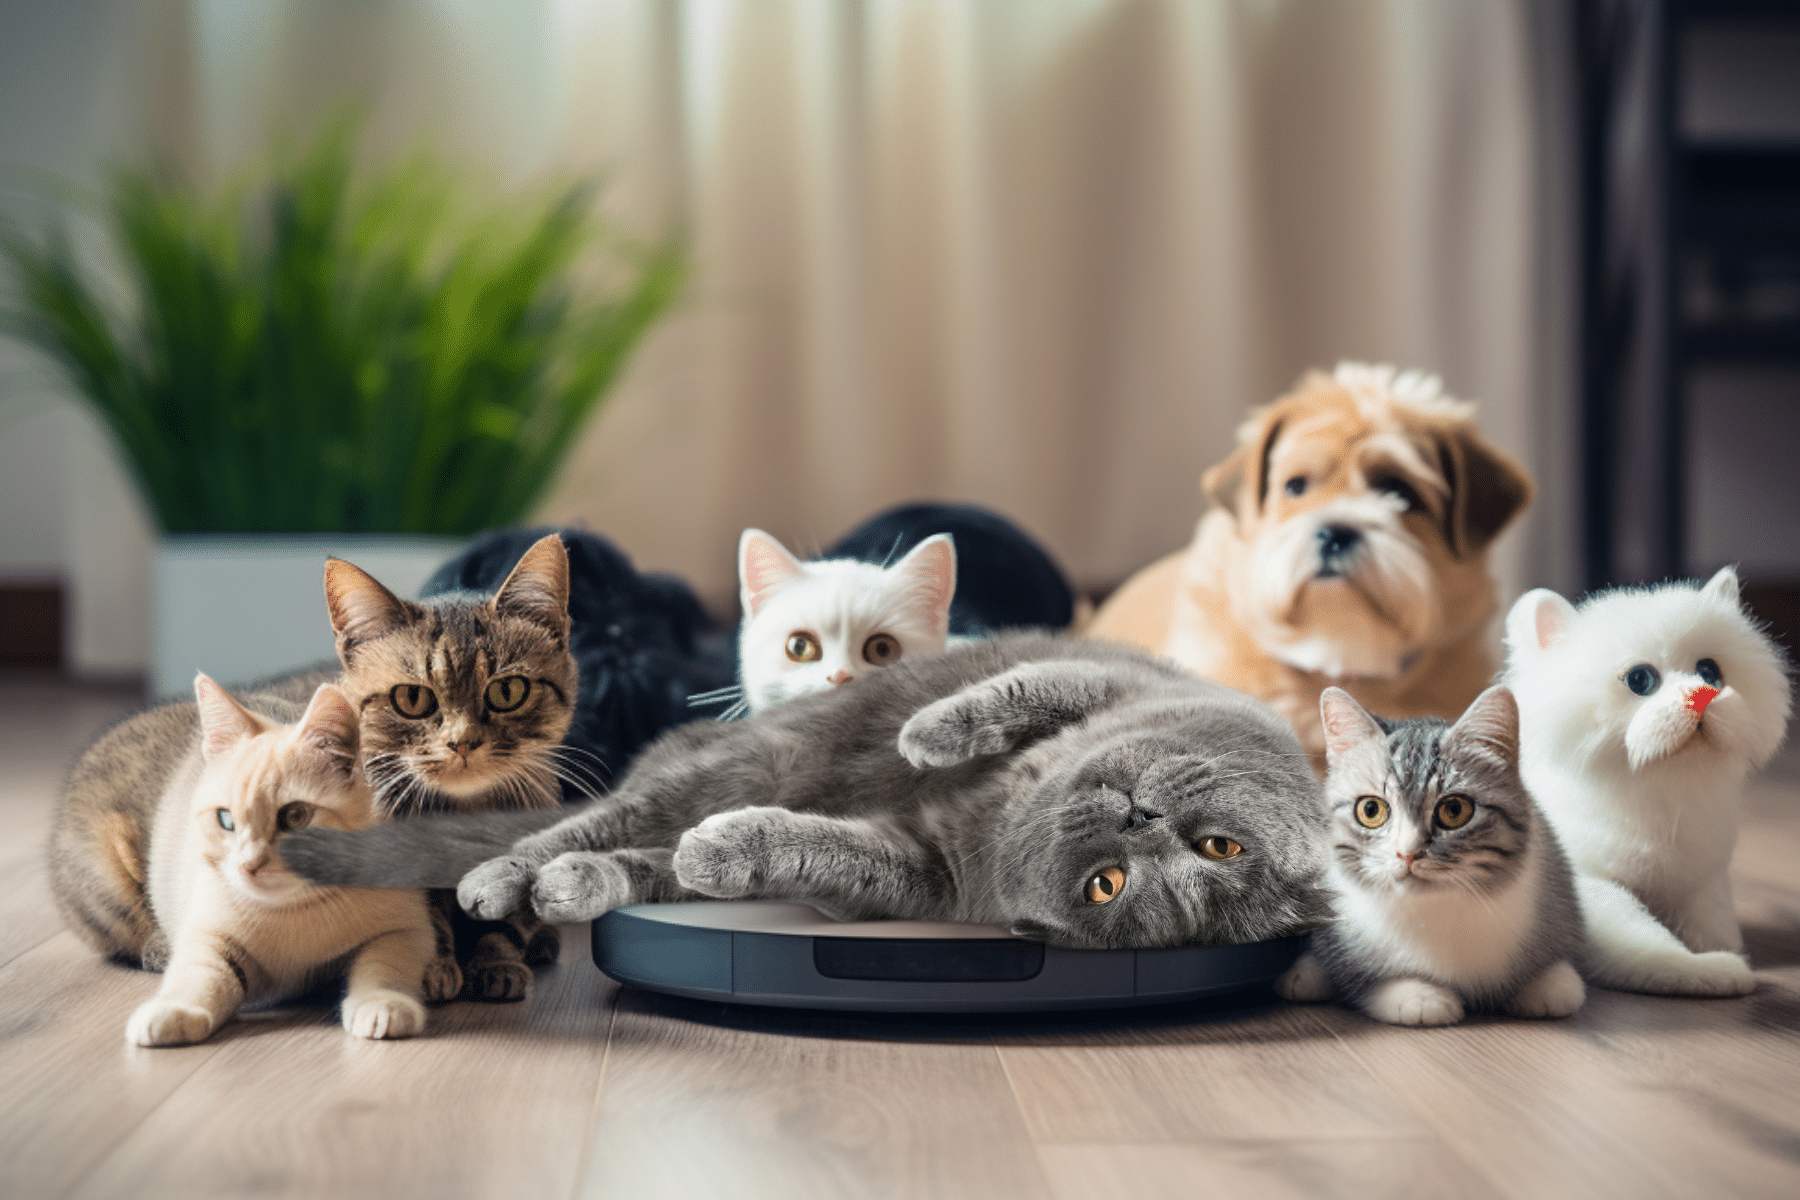 Clean with a robot vacuum for kittens and animals